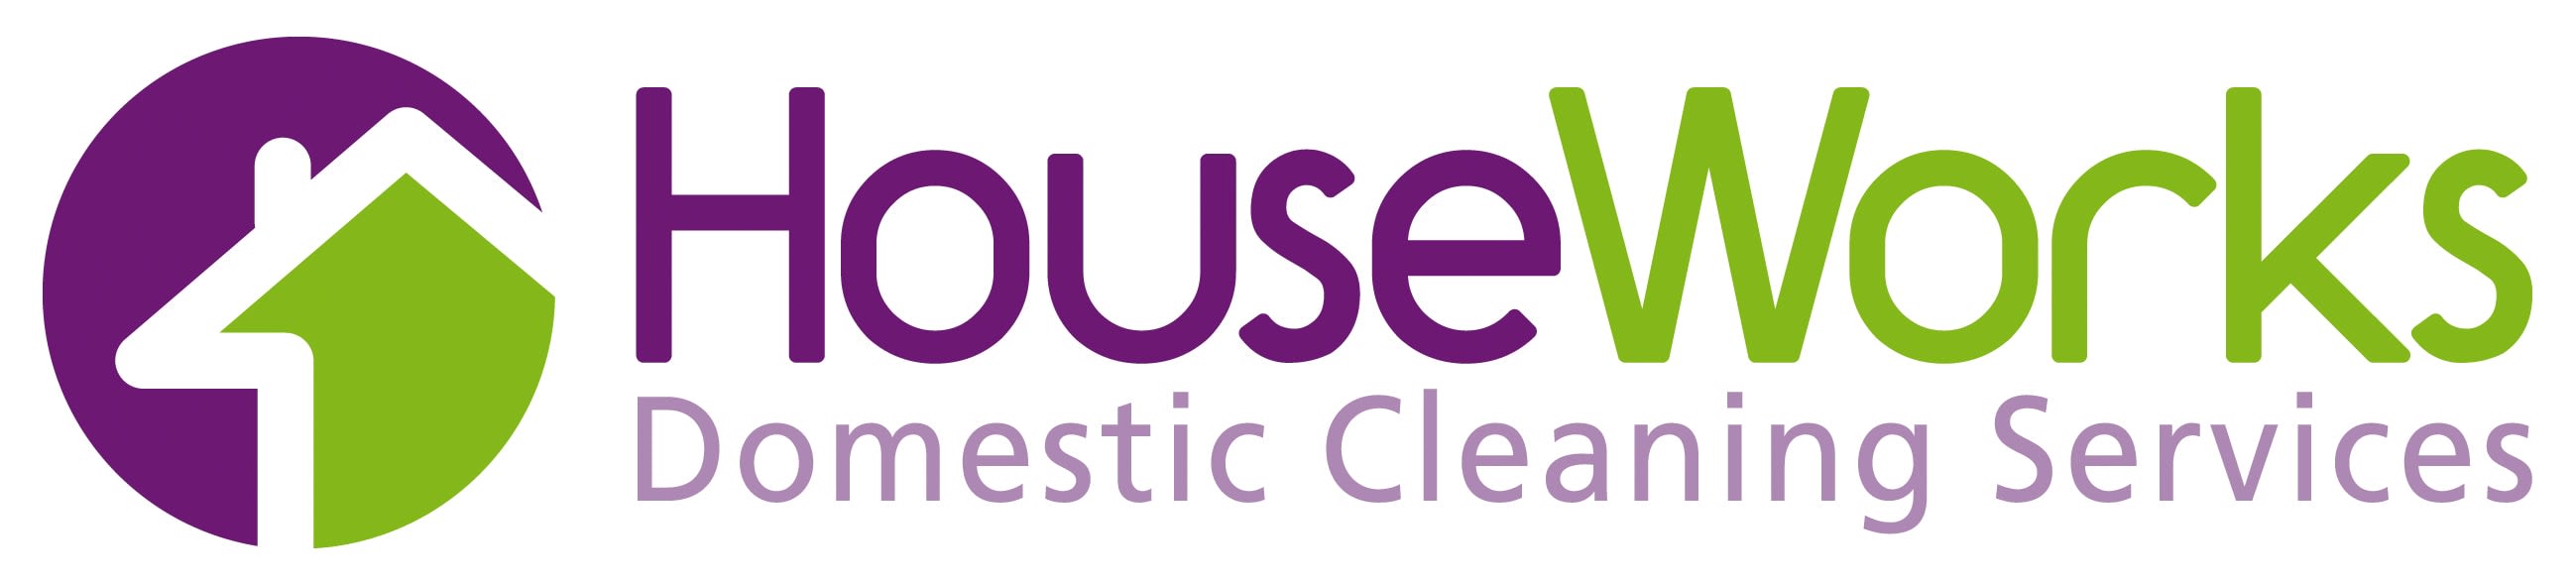 HouseWorks Home Services